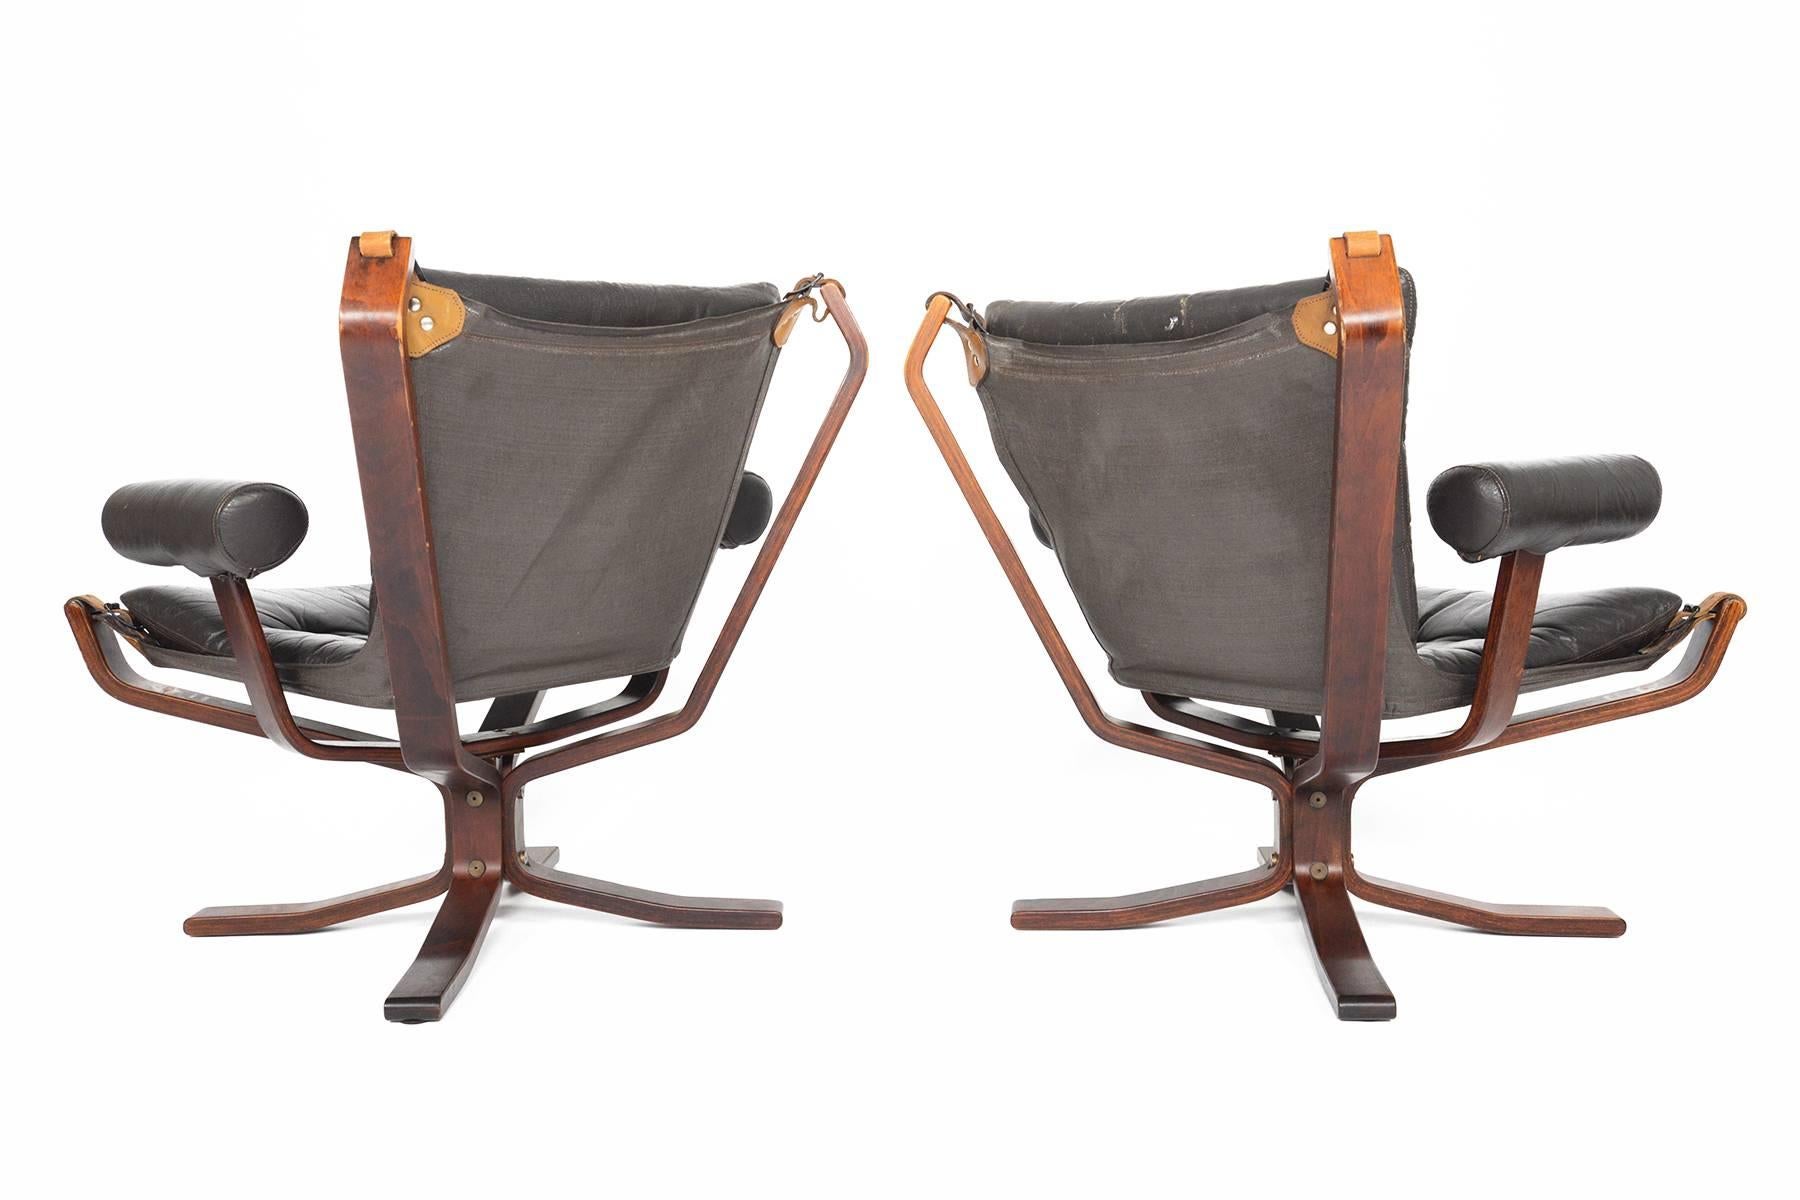 This gorgeous pair of Norwegian modern Falcon chairs was designed by Sigurd Ressell for Vatne Møbler in the early 1970s. Covered in original dark chestnut toned, patinated leather, this ingeniously designed chair is known for its comfort. The